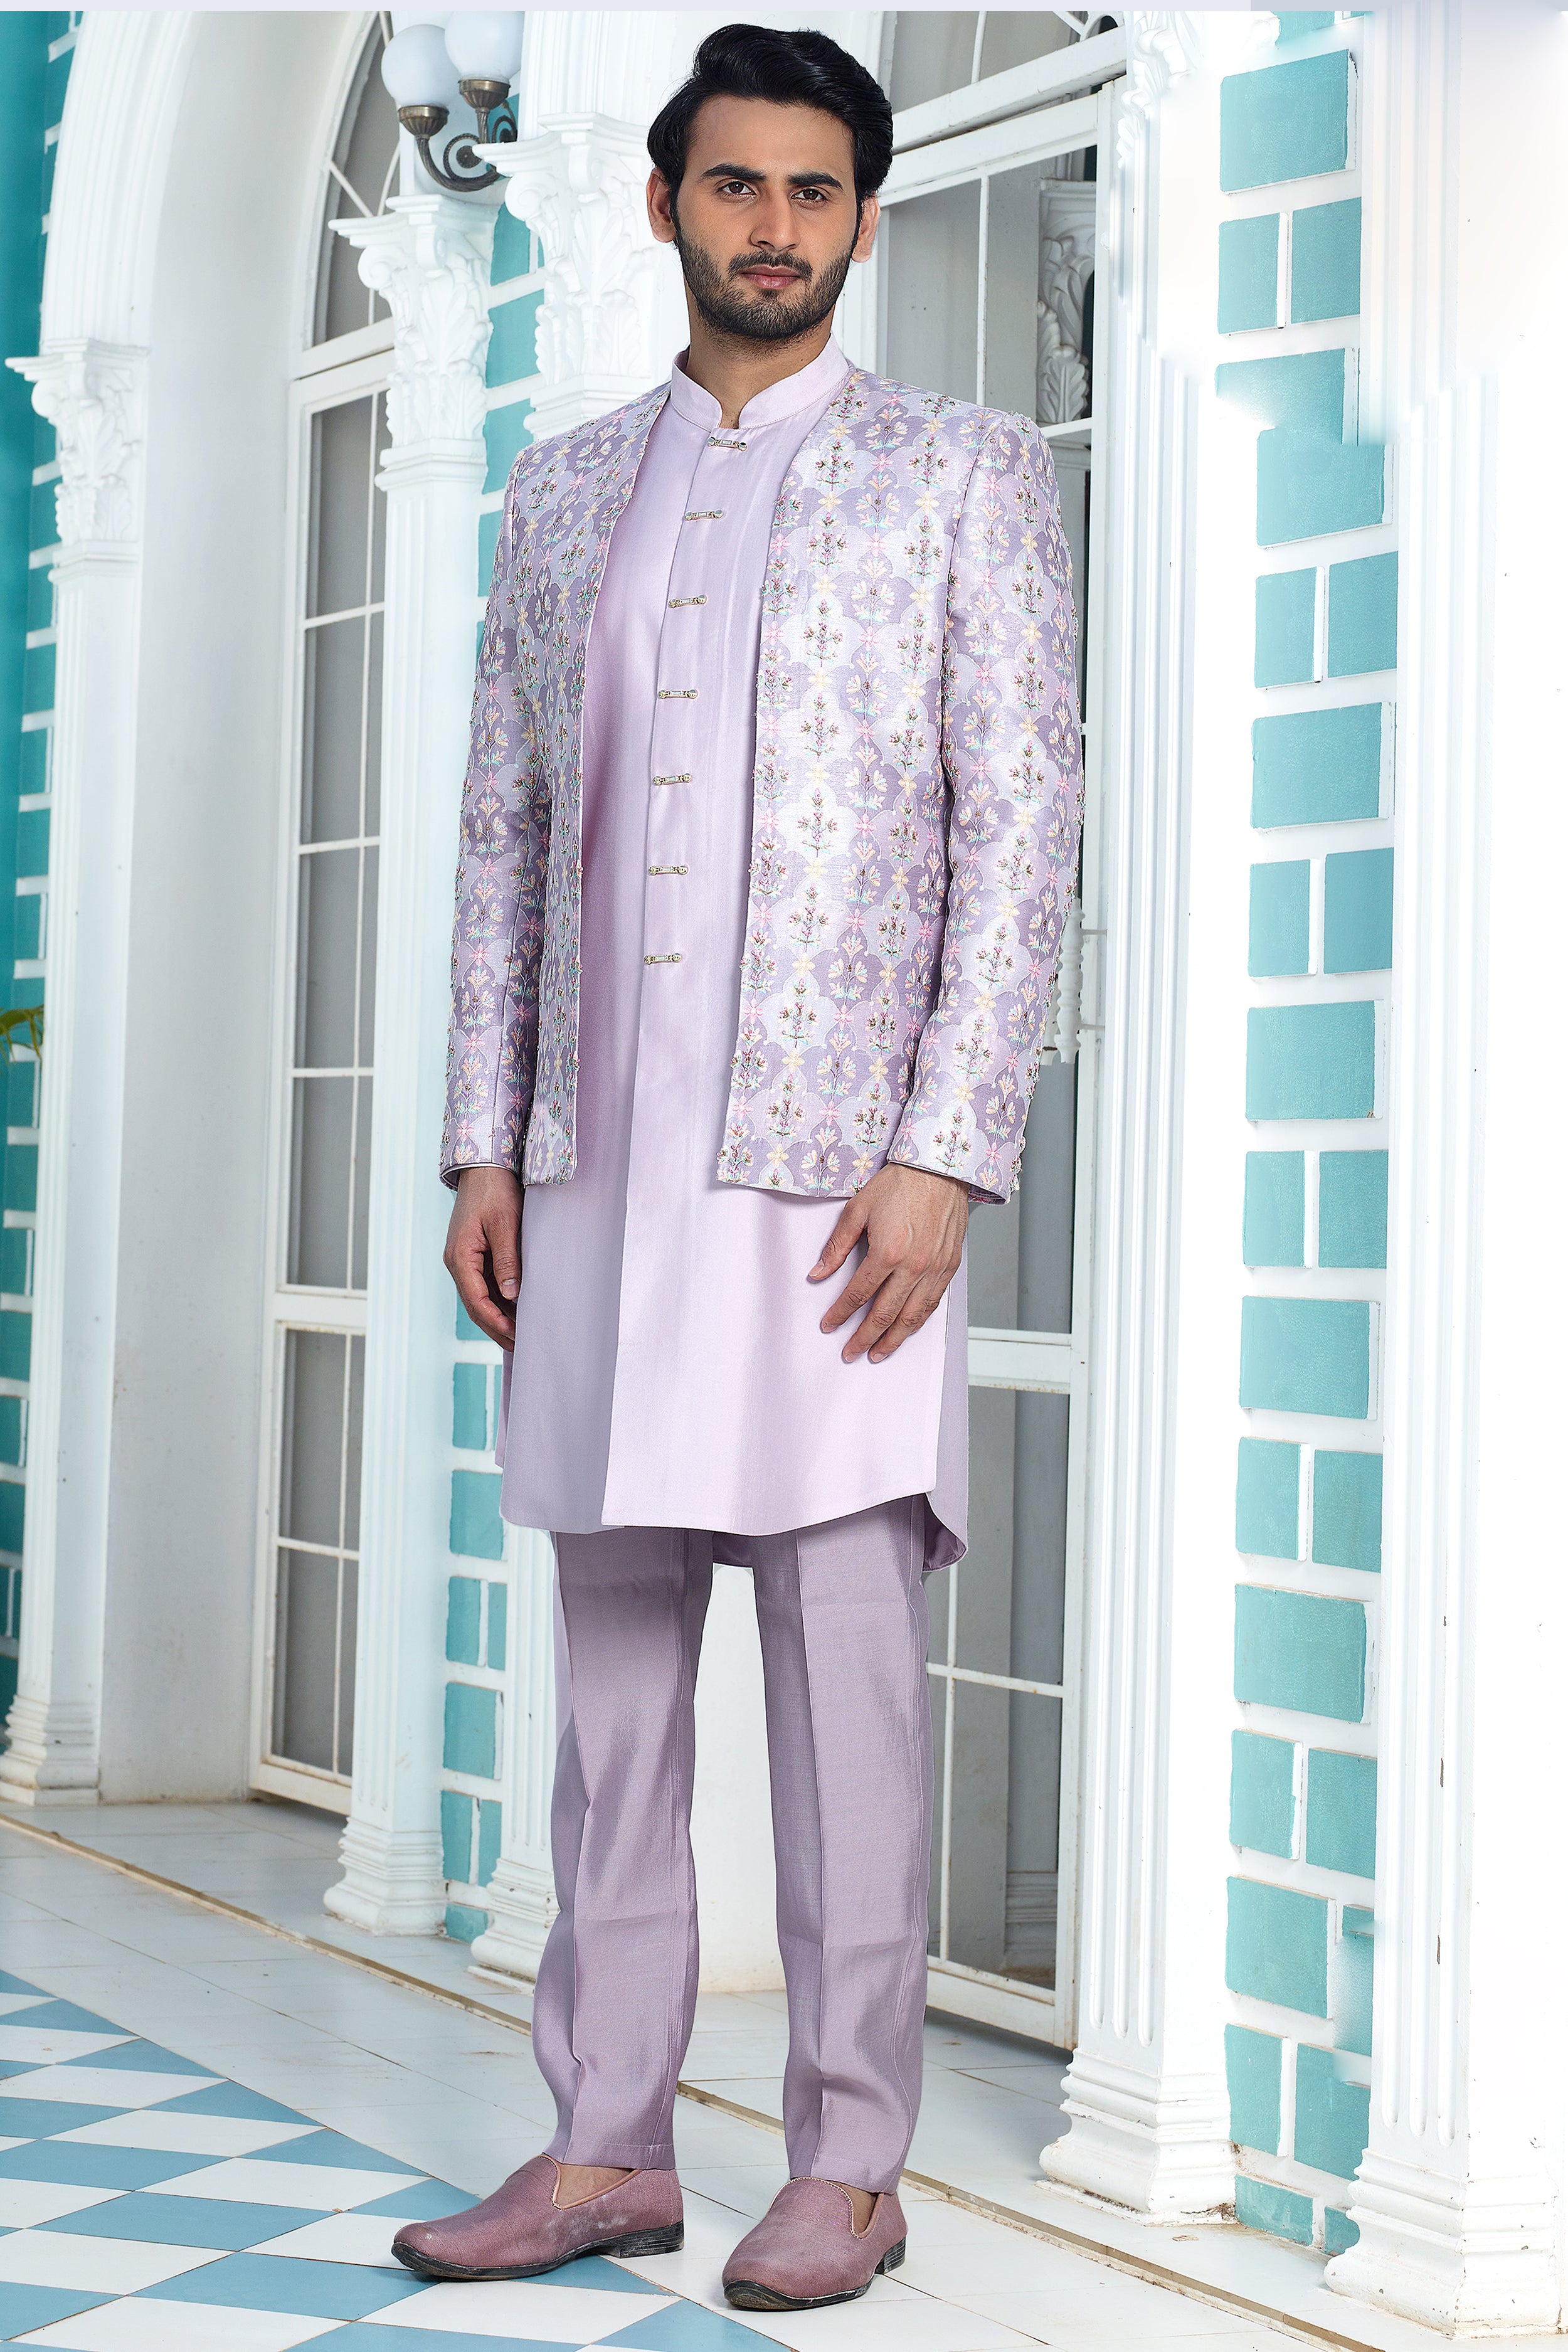 9 Sherwanis And Other Ethnic Pieces For Men To Wear At Weddings | Zoom TV